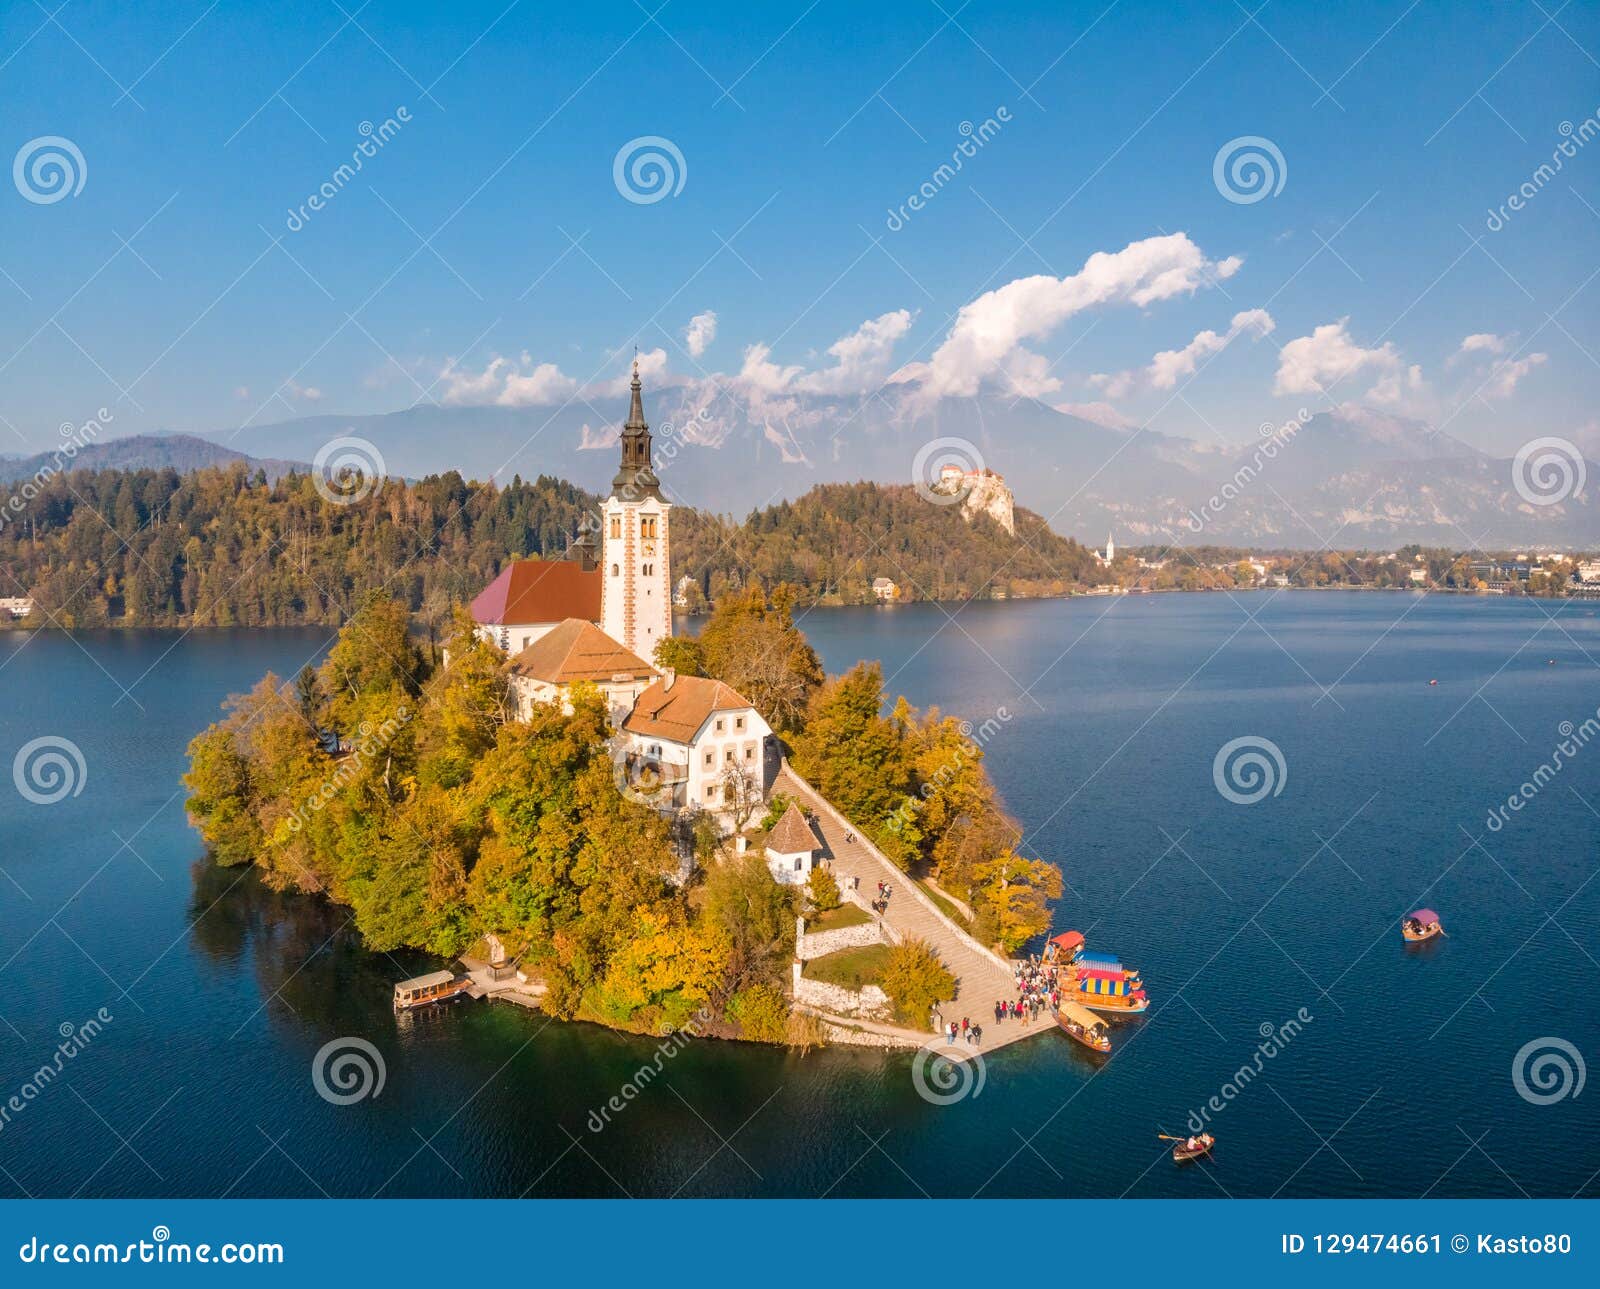 aerial view of bled island on lake bled, and bled castle and mountains in background, slovenia.